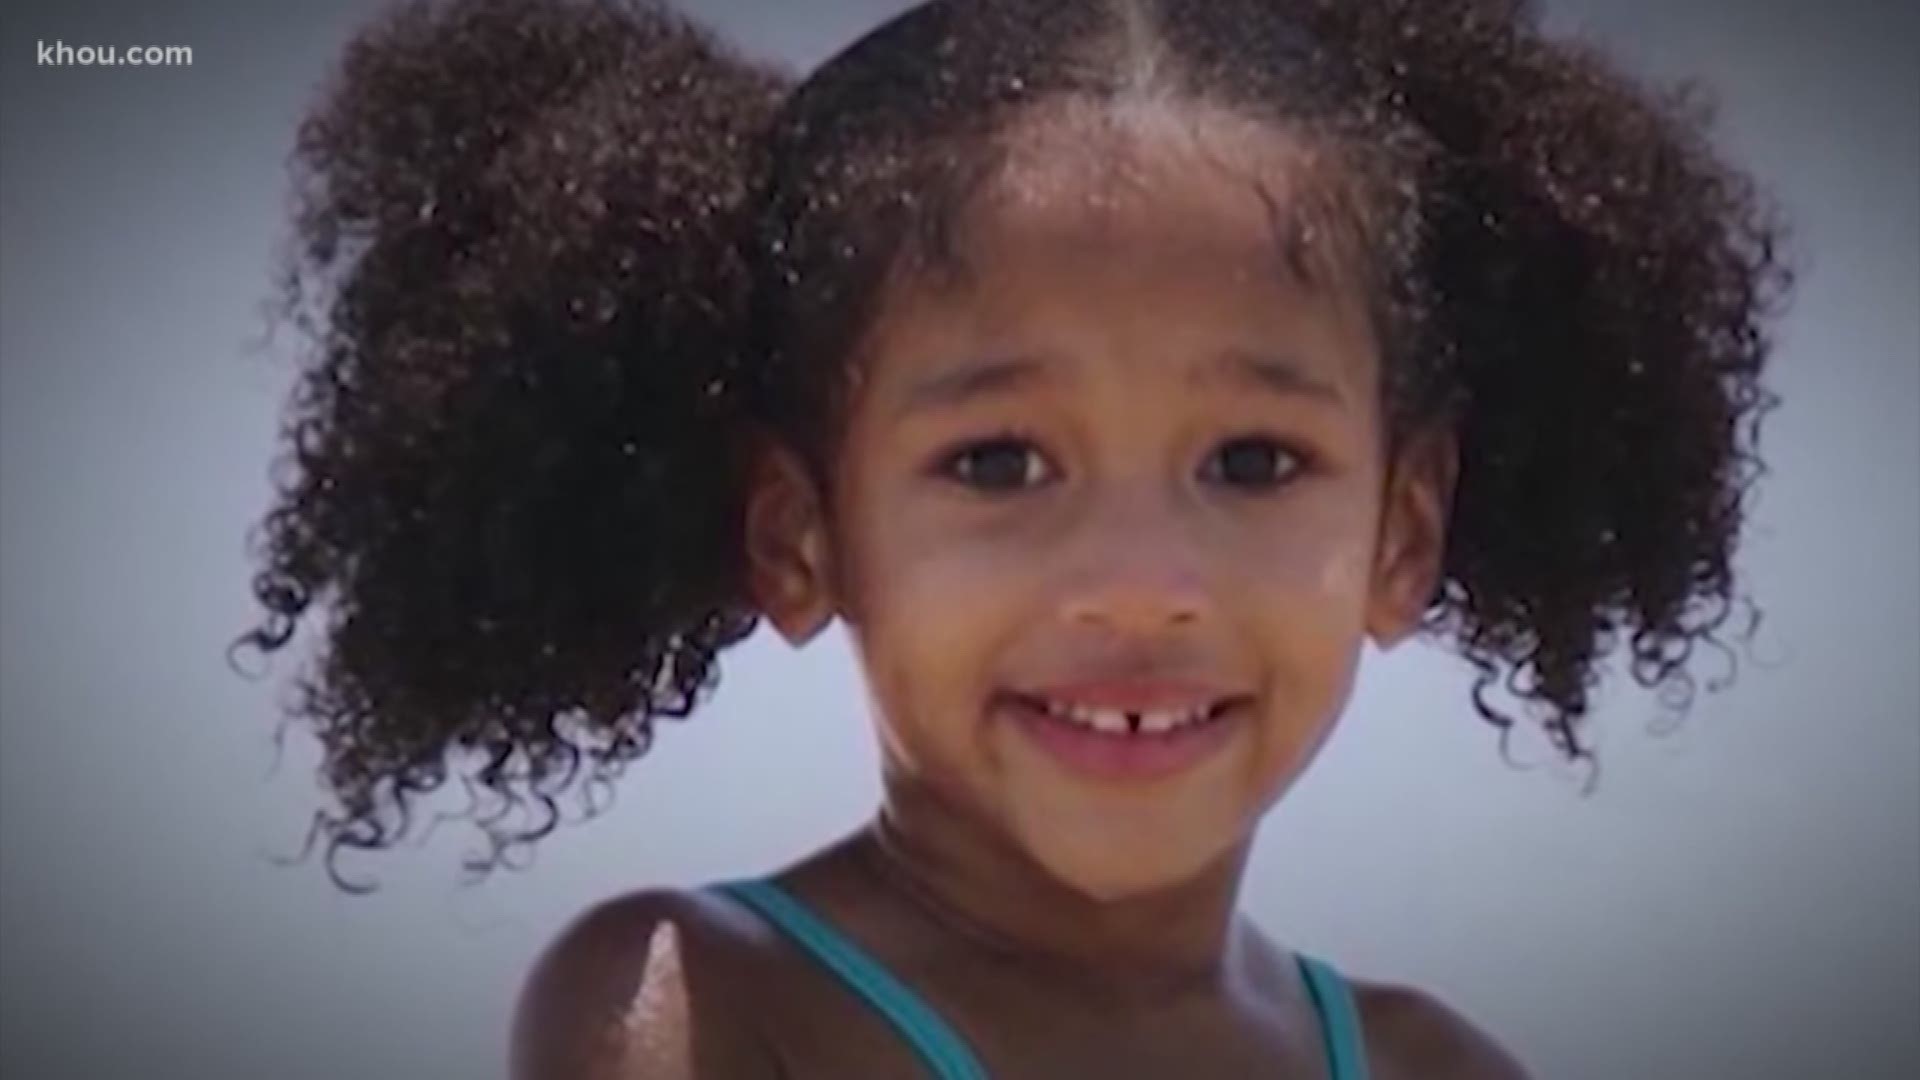 Maleah is one of 58 missing children in the Houston area.